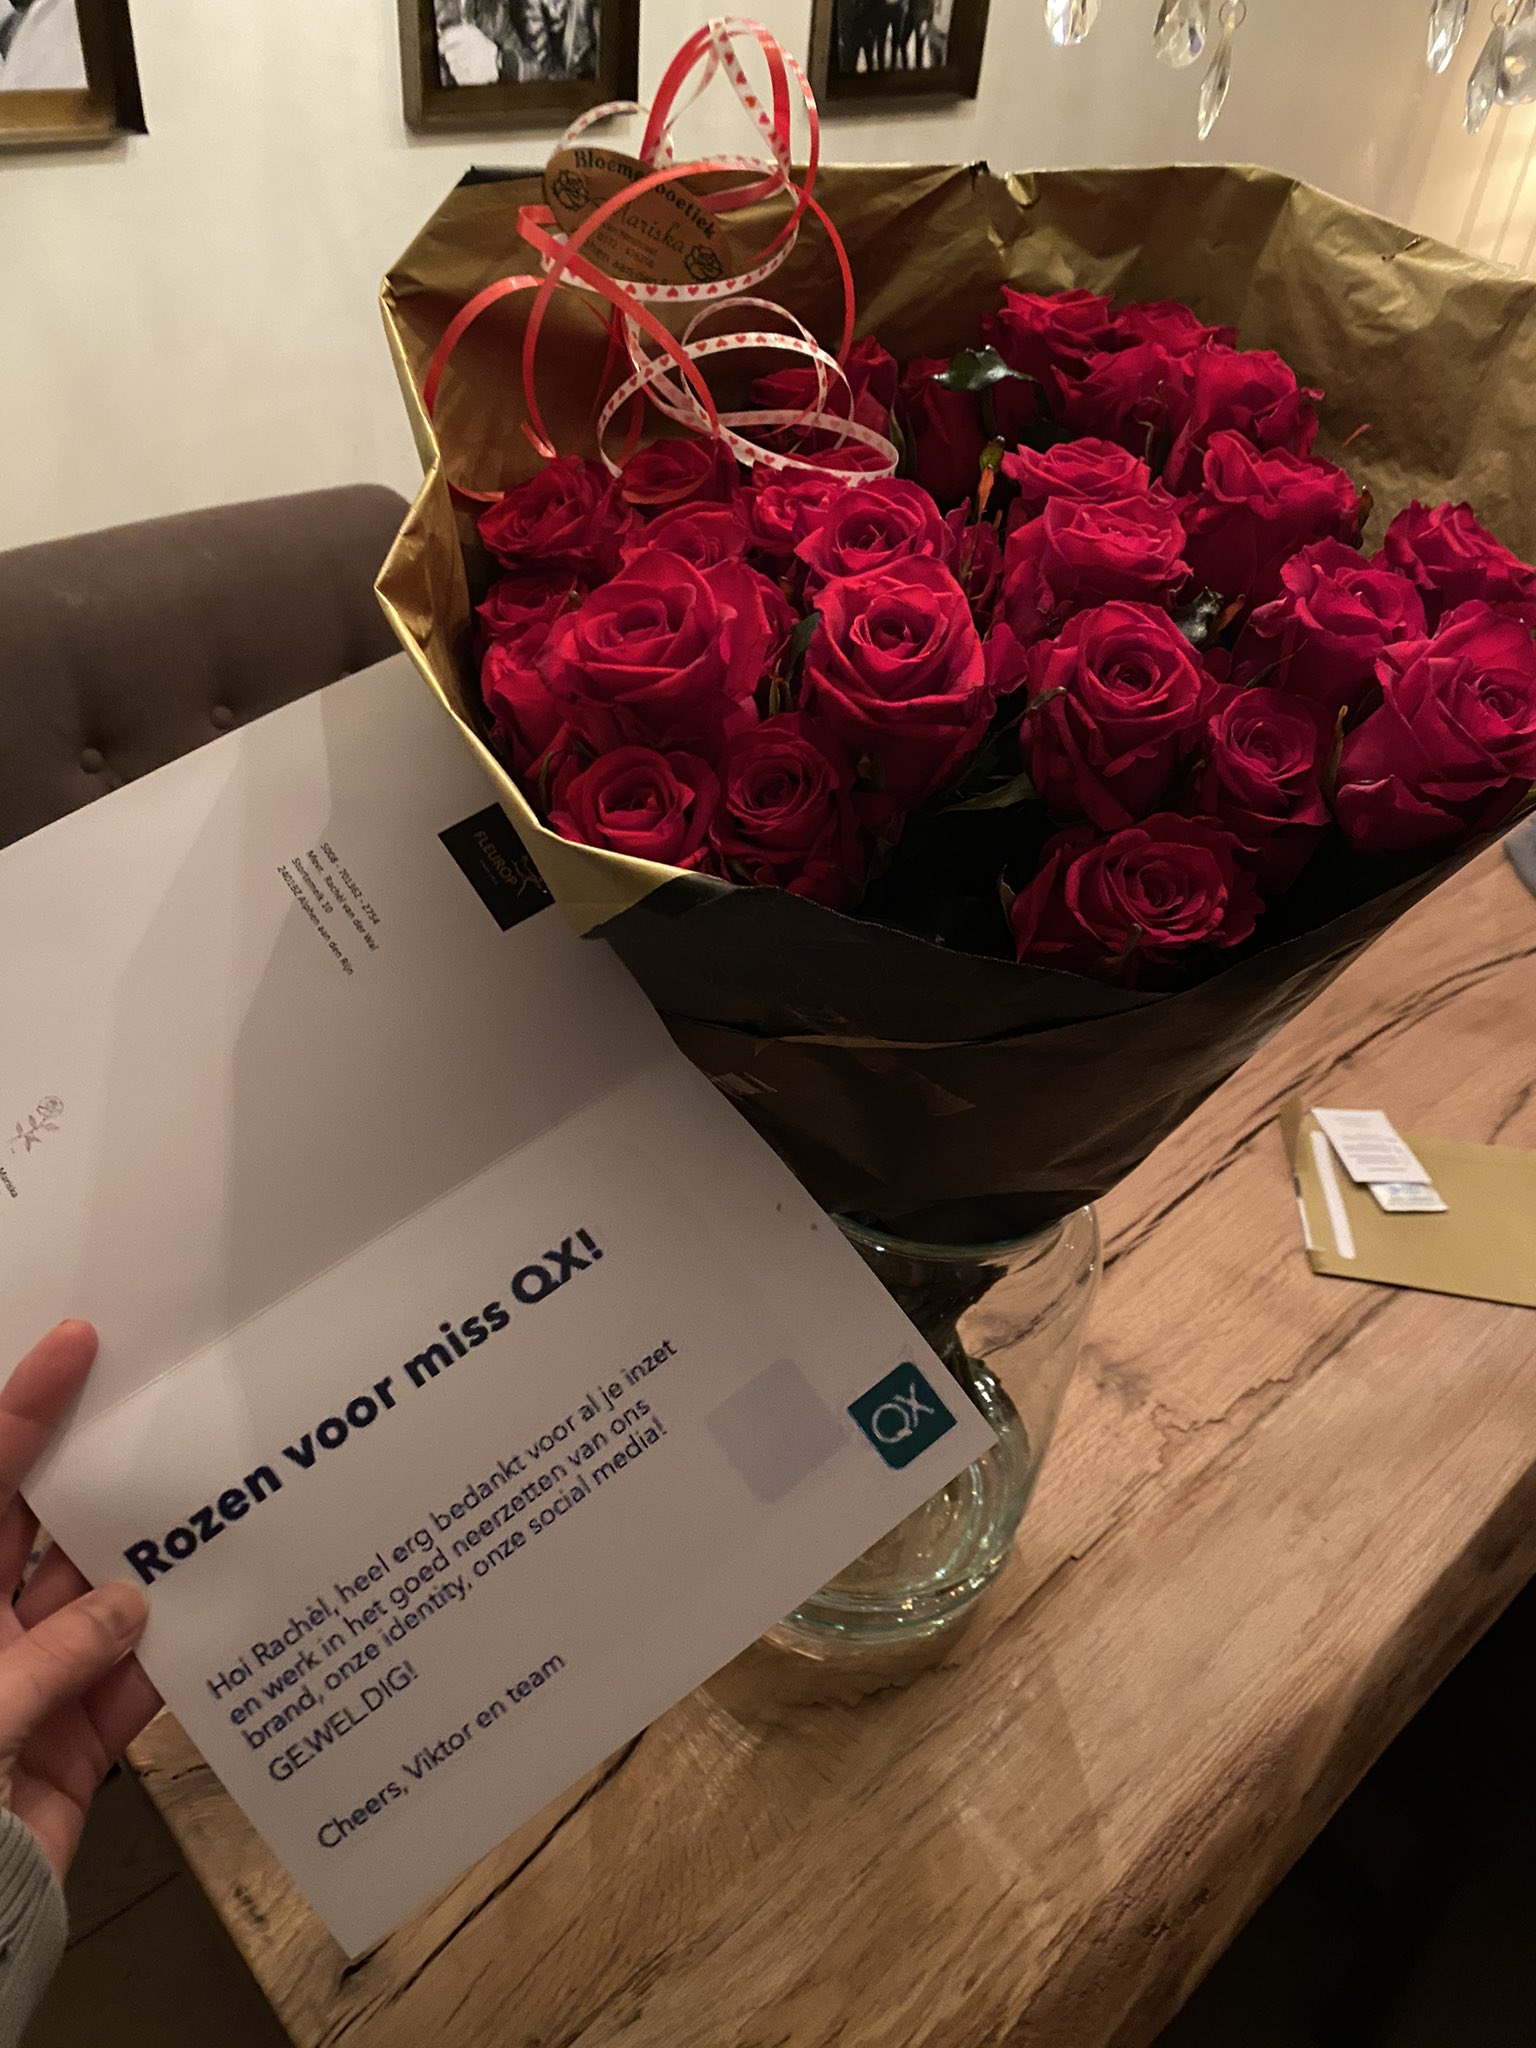 Rachel van der Wal on X: This is so sweet! @Qxperts_io received flowers  today because of building our #Qxperts brand! 💚 I thought my boyfriend  bought them, but this was even more